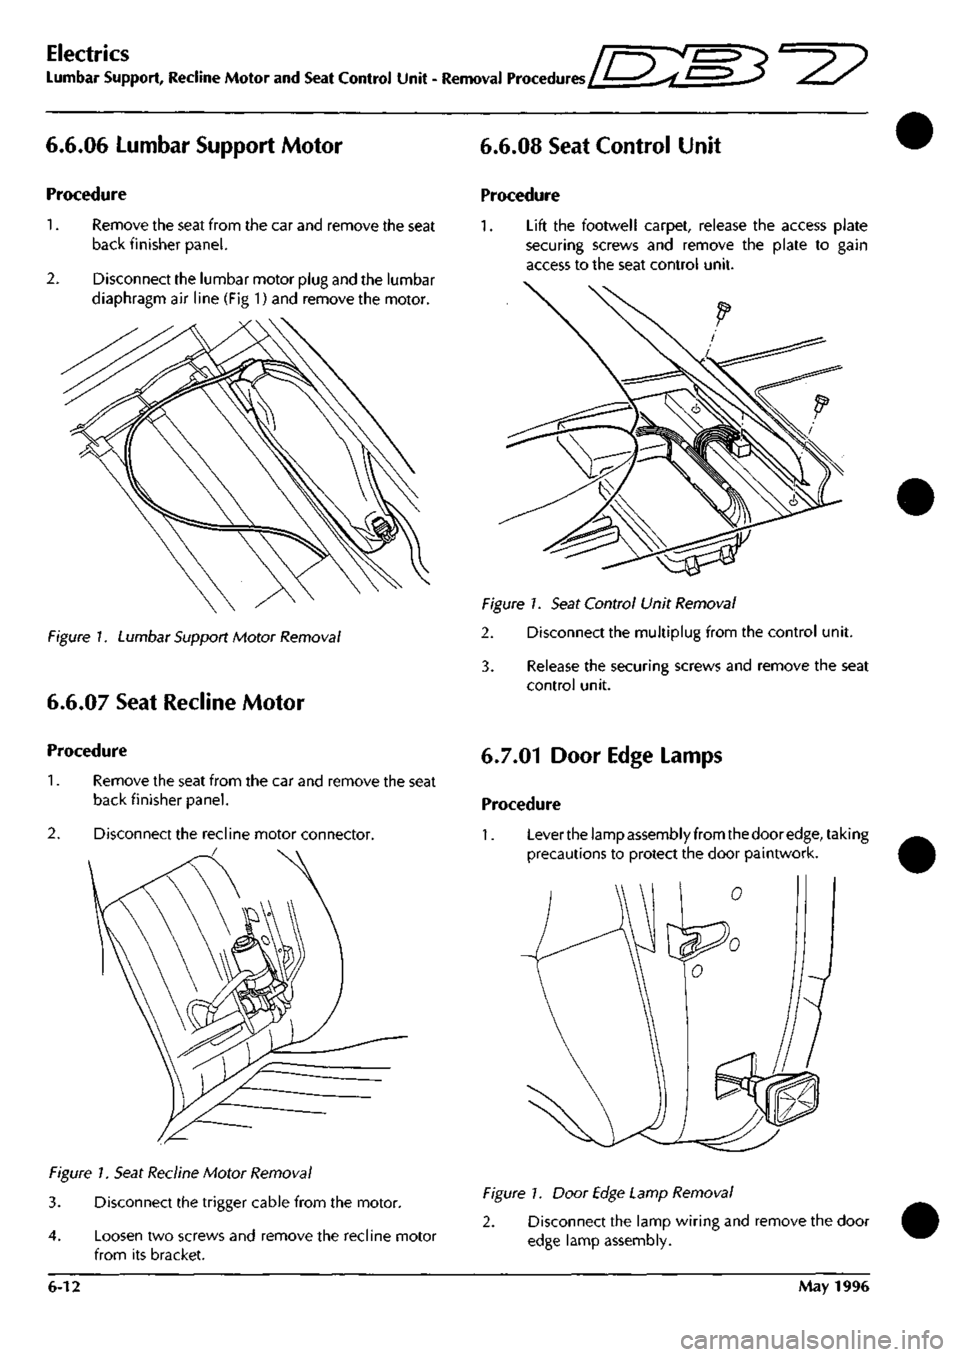 ASTON MARTIN DB7 1997 User Guide 
Electrics 
Lumbar Support, Recline Motor and Seat Control Unit - Removal Procedures 
6.6.06 Lumbar Support Motor 
Procedure 

1.
 Remove the seat from the car and remove the seat 
back finisher panel